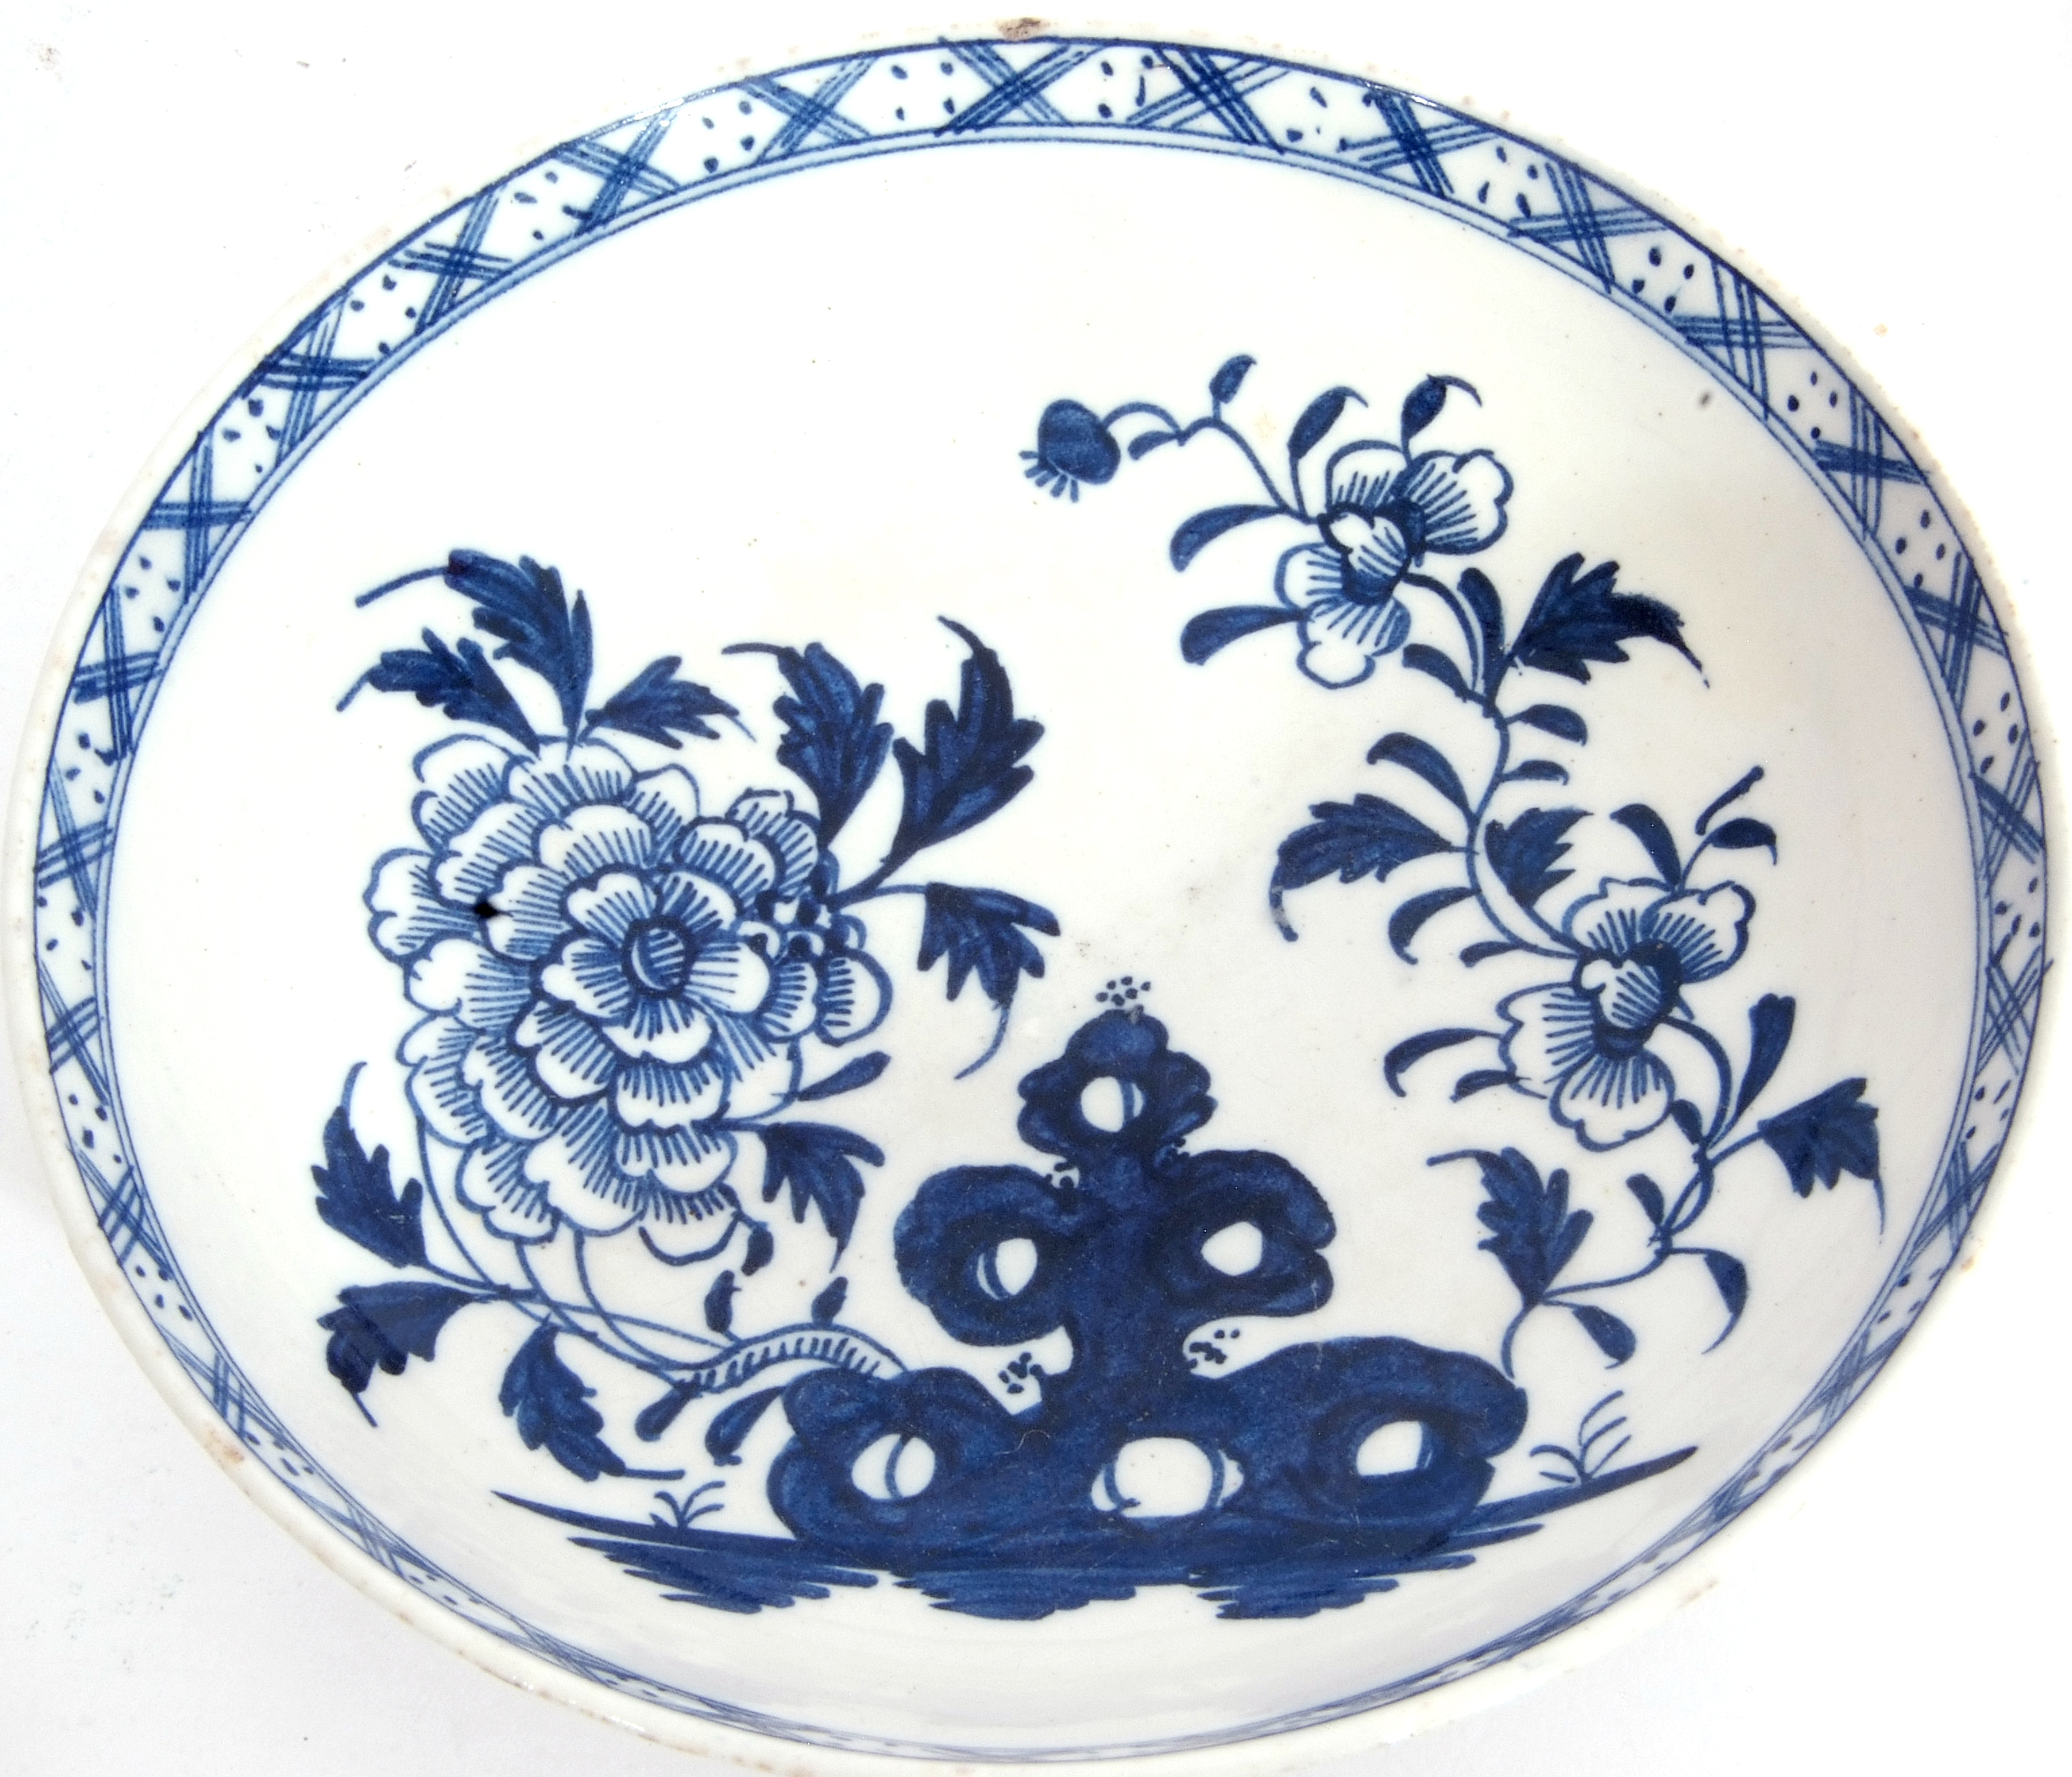 Large Lowestoft porcelain tea bowl and saucer decorated in underglaze blue with flowers and rock - Image 8 of 9